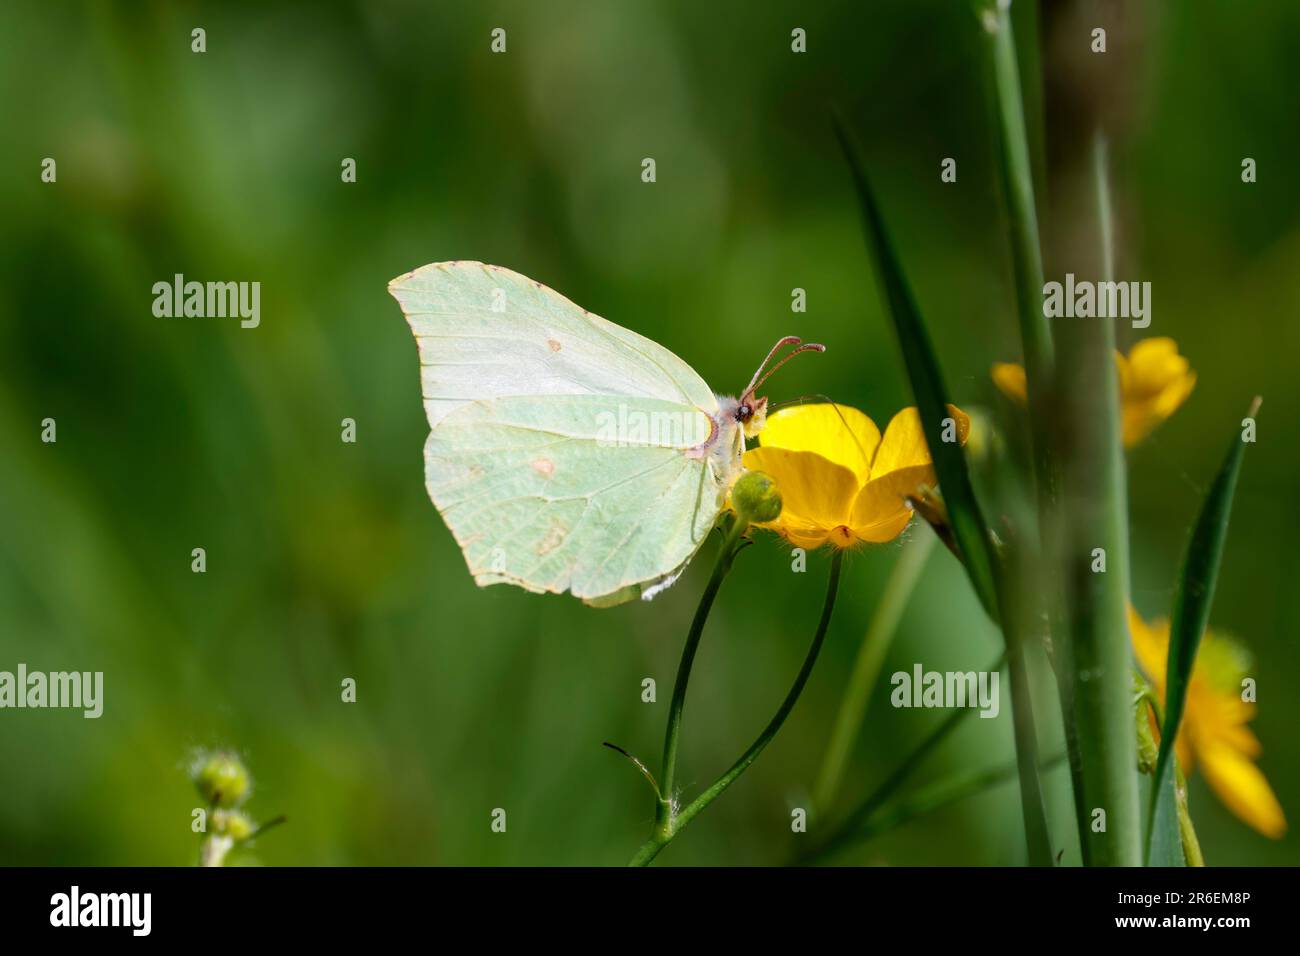 Brimstone butterfly Gonepteryx rhamni, yellowish underwings with brown markings and obvious veins uniquely shaped wings upperwings of male more yellow Stock Photo